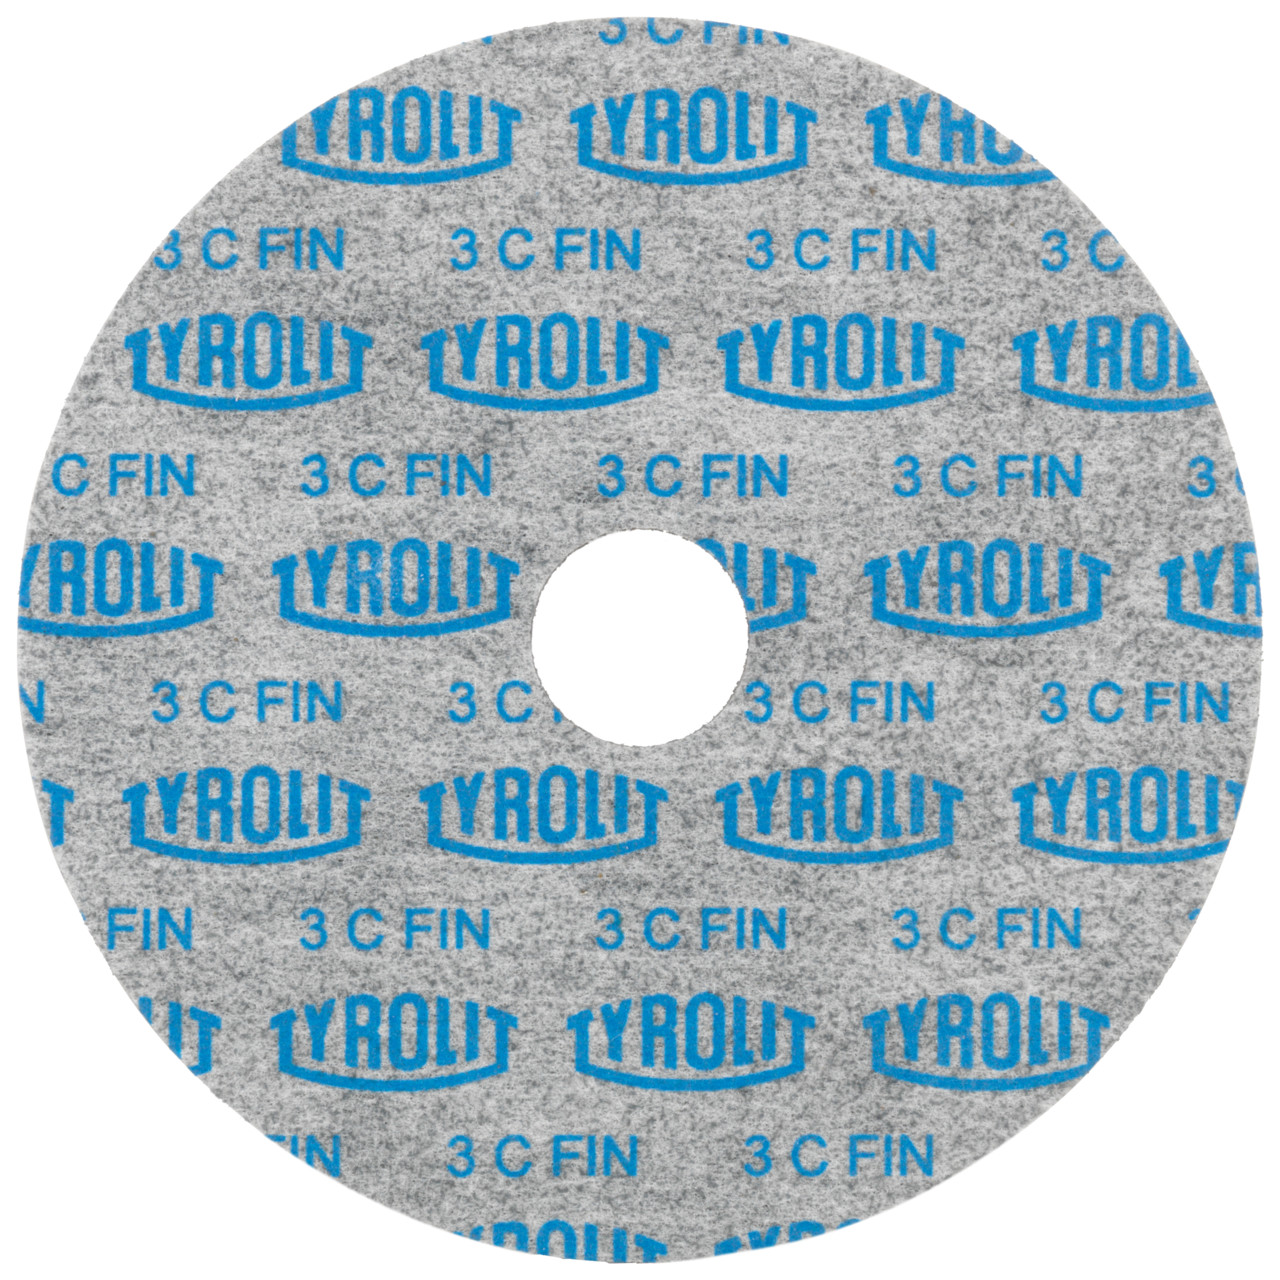 Tyrolit Pressed compact discs DxDxH 152x6x25.4 Universally applicable, 3 C FEIN, shape: 1, Art. 34190276